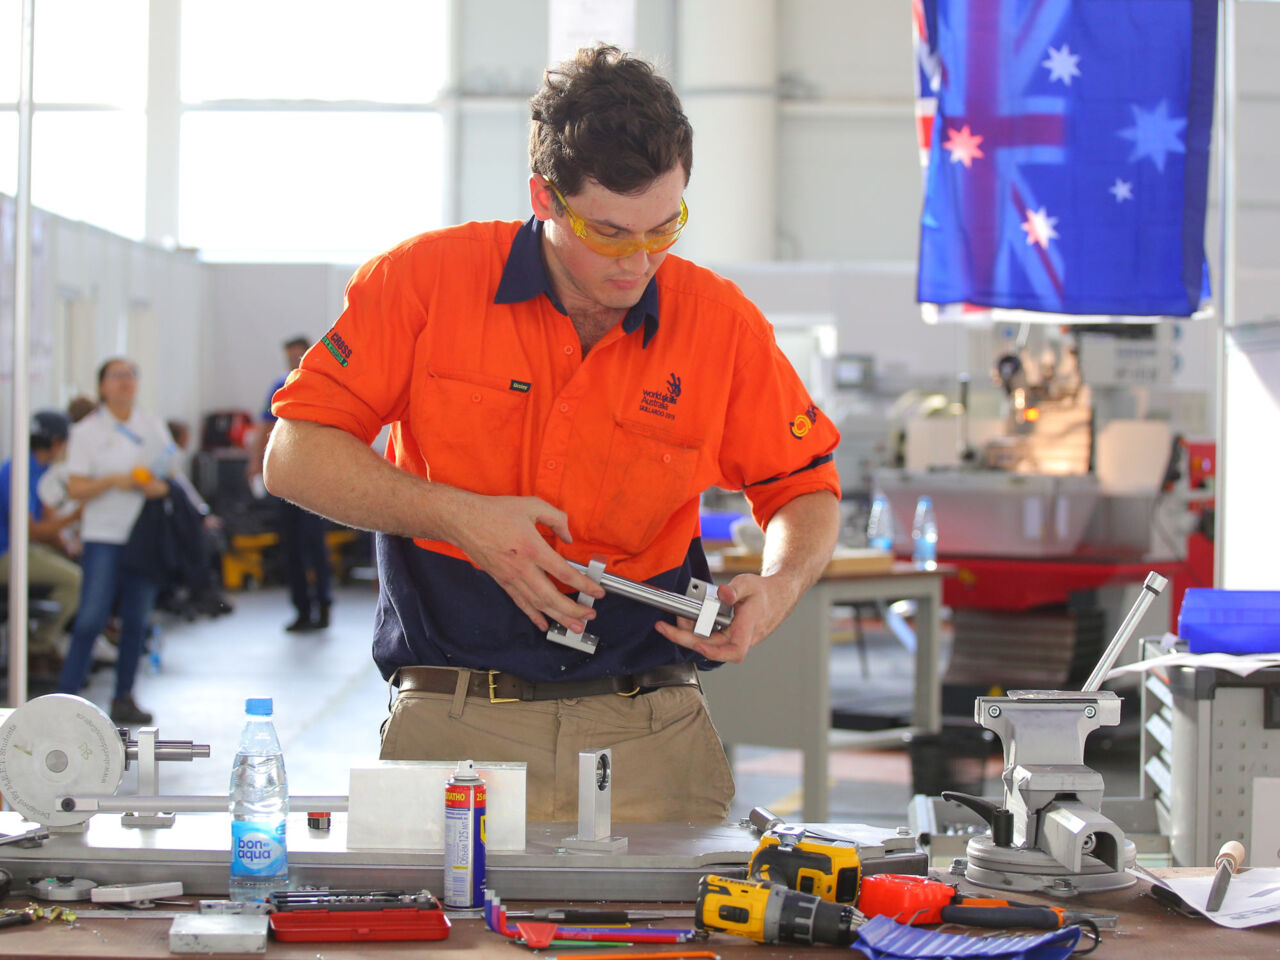 Tyson Knight, a WorldSkills Competitor who won silver in Plumbing & Heating at WorldSkills Calgary 2009.